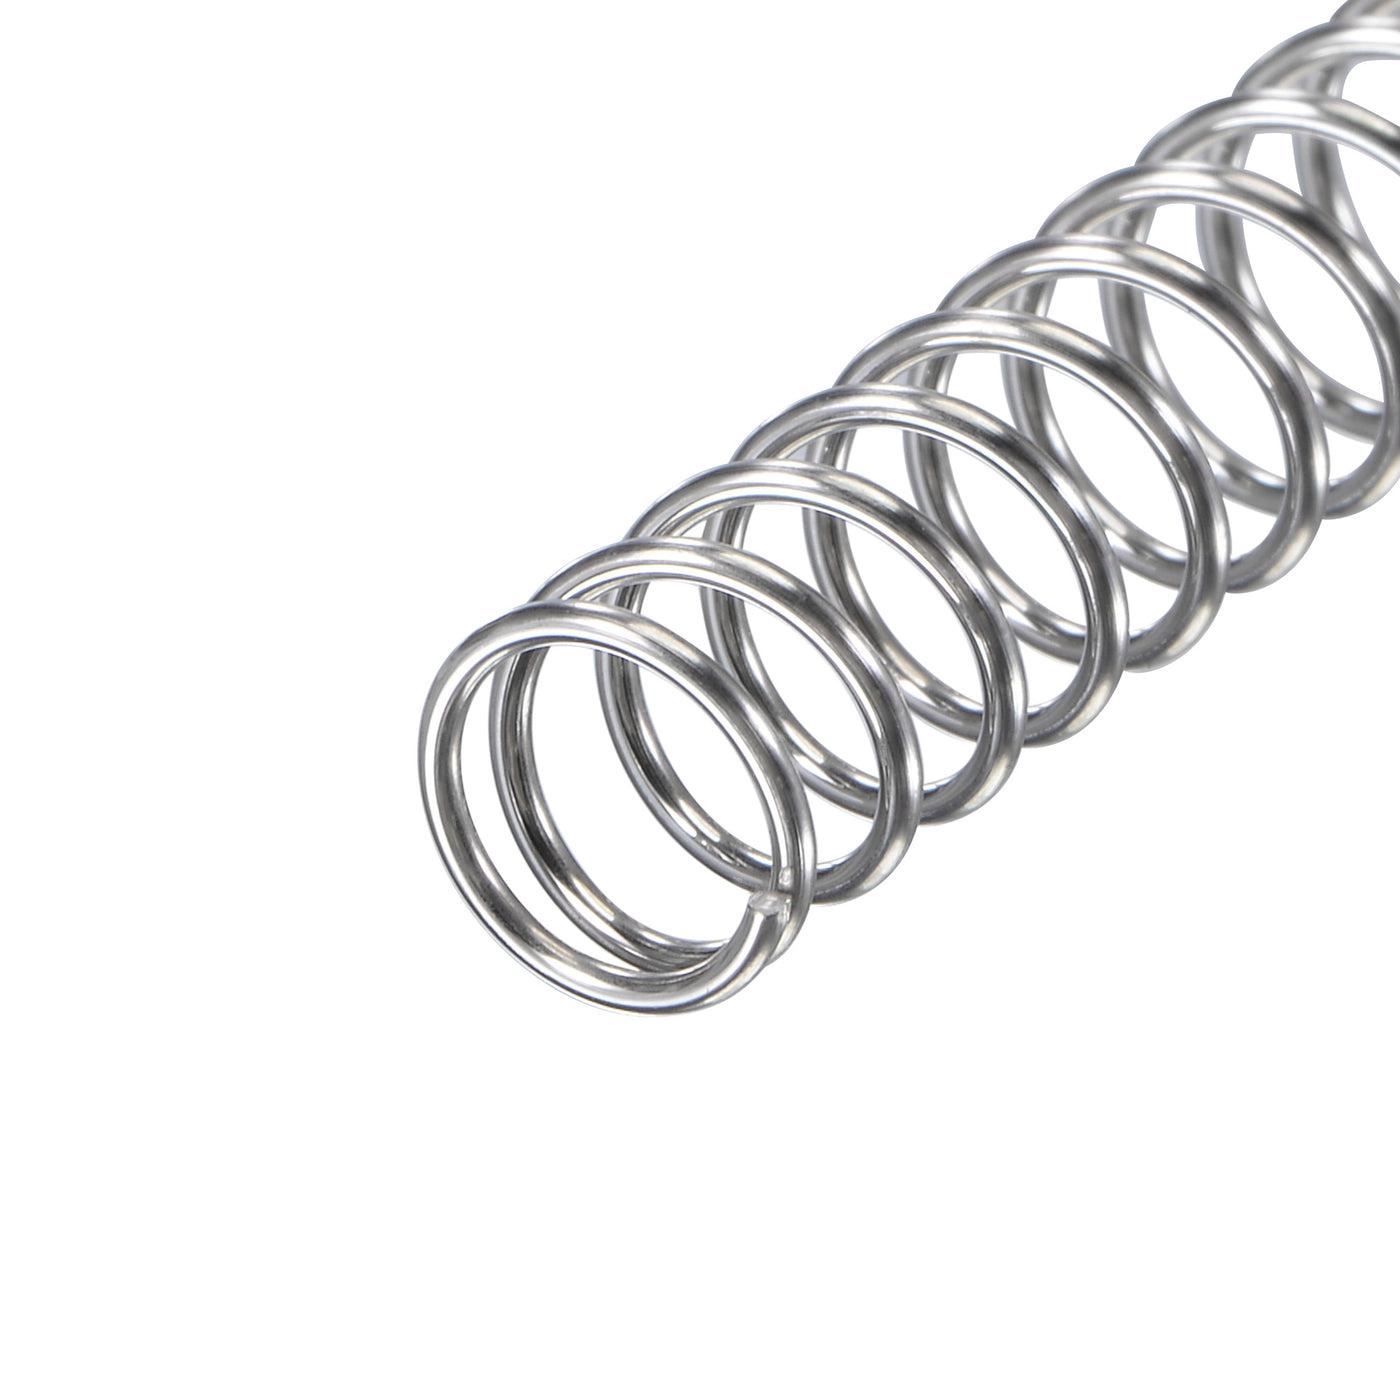 uxcell Uxcell 8mmx0.8mmx45mm 304 Stainless Steel Compression Spring 11.8N Load Capacity 10pcs